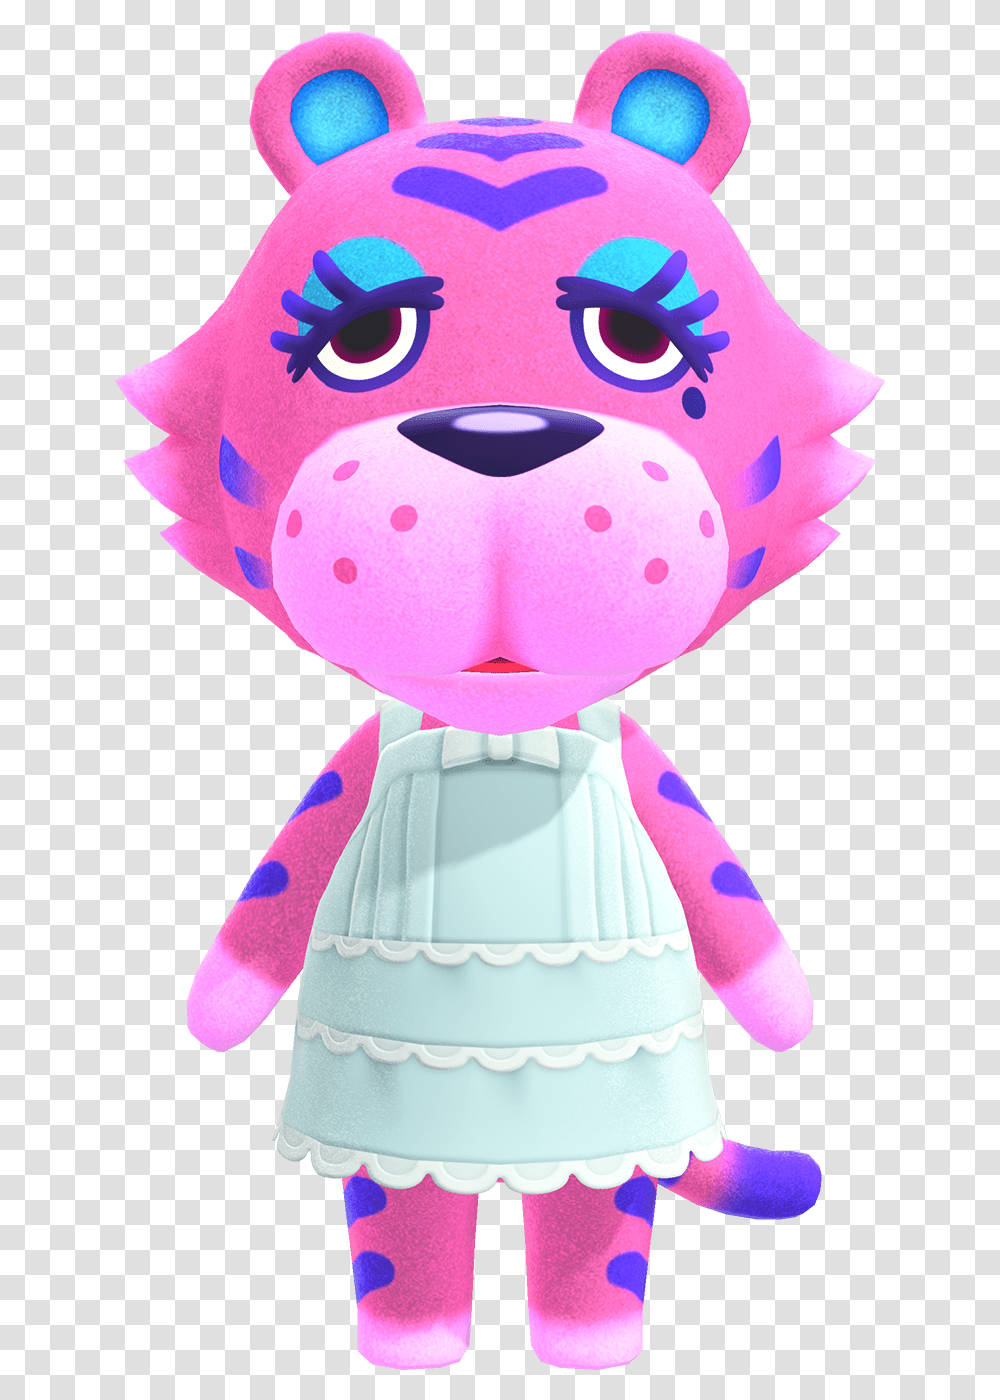 Claudia Animal Crossing Wiki Nookipedia Claudia Animal Crossing, Doll, Toy, Figurine Transparent Png